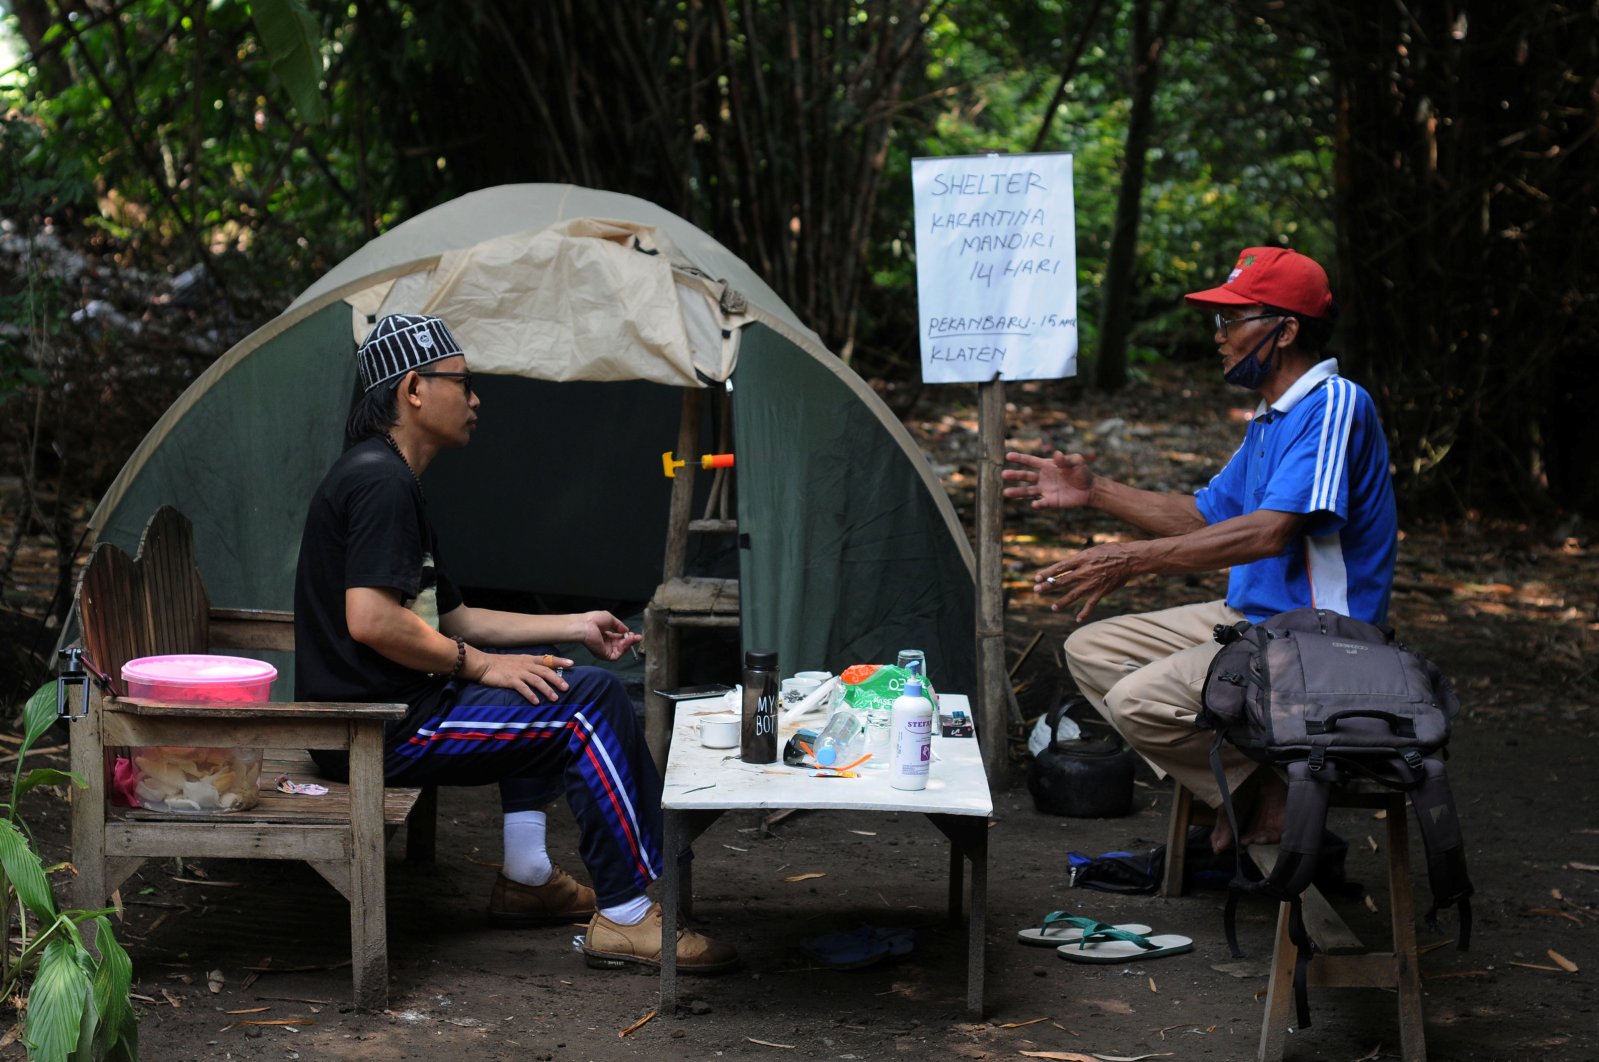 Abdullah Al Mabrur talks with his neighbour outside a tent he used for self-quarantine on a river bank after he came back from Pekanbaru, to prevent the spread of the coronavirus disease in Klaten, Central Java province, Indonesia, April 20, 2020. (Reuters Photo)